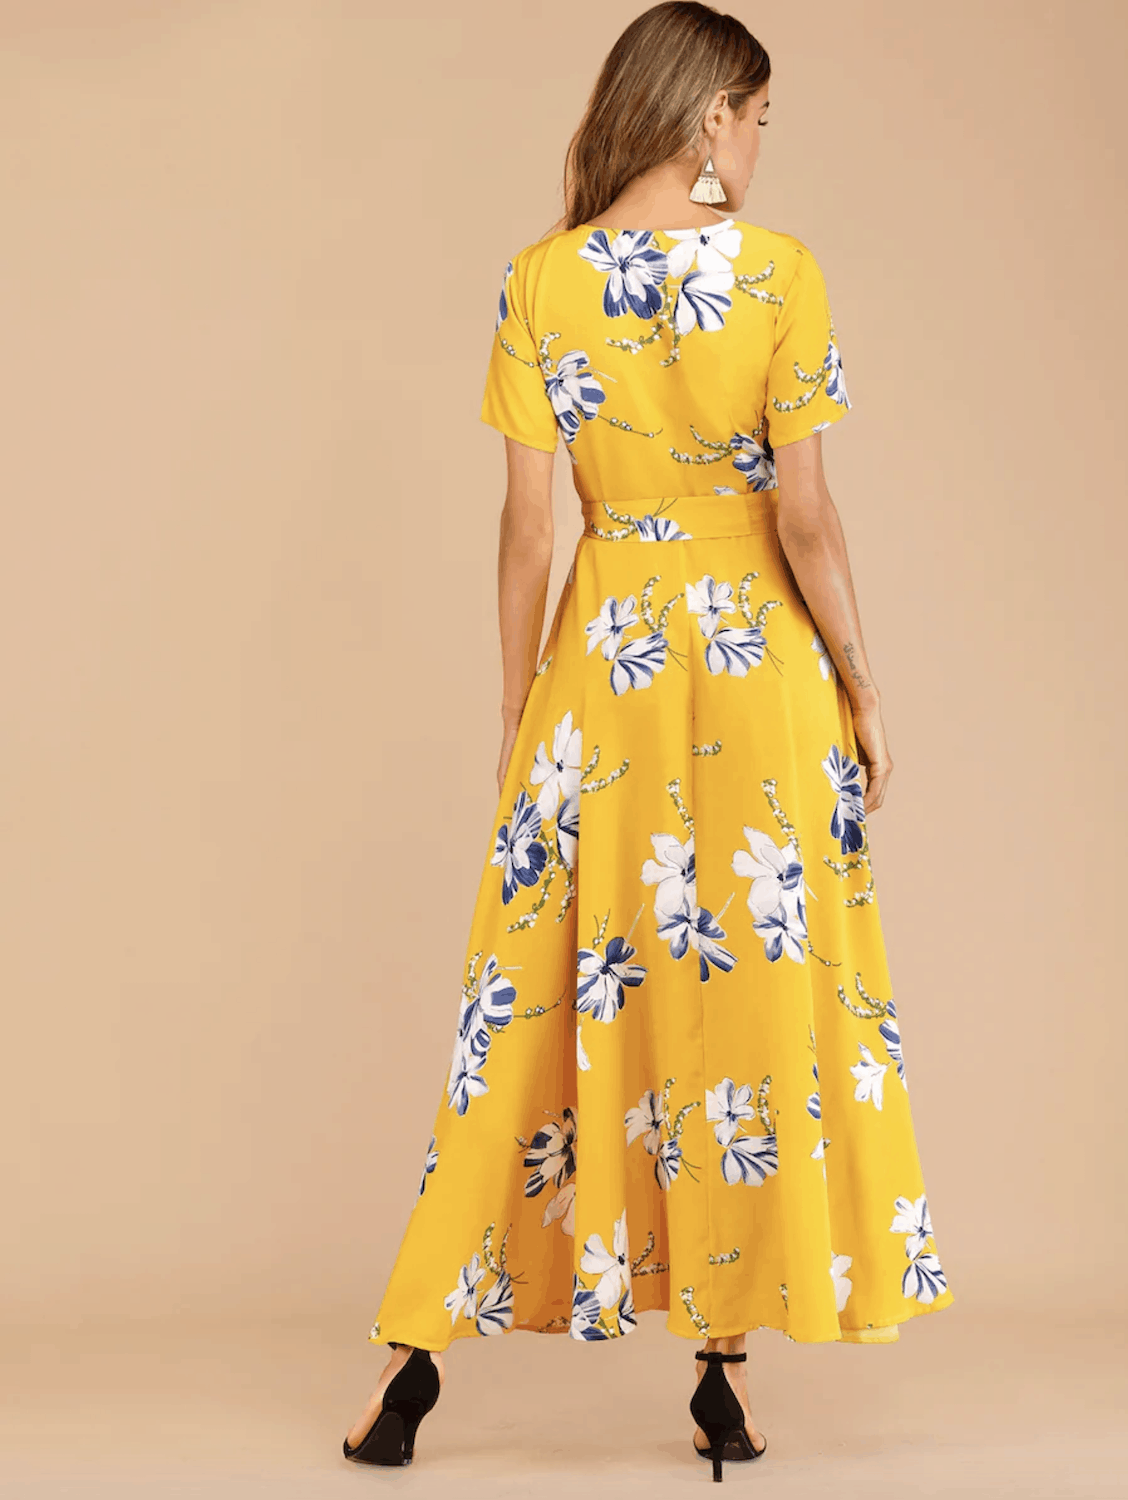 Summer Honeymoon Outfits for Her Yellow Floral Print Belted Dress 3